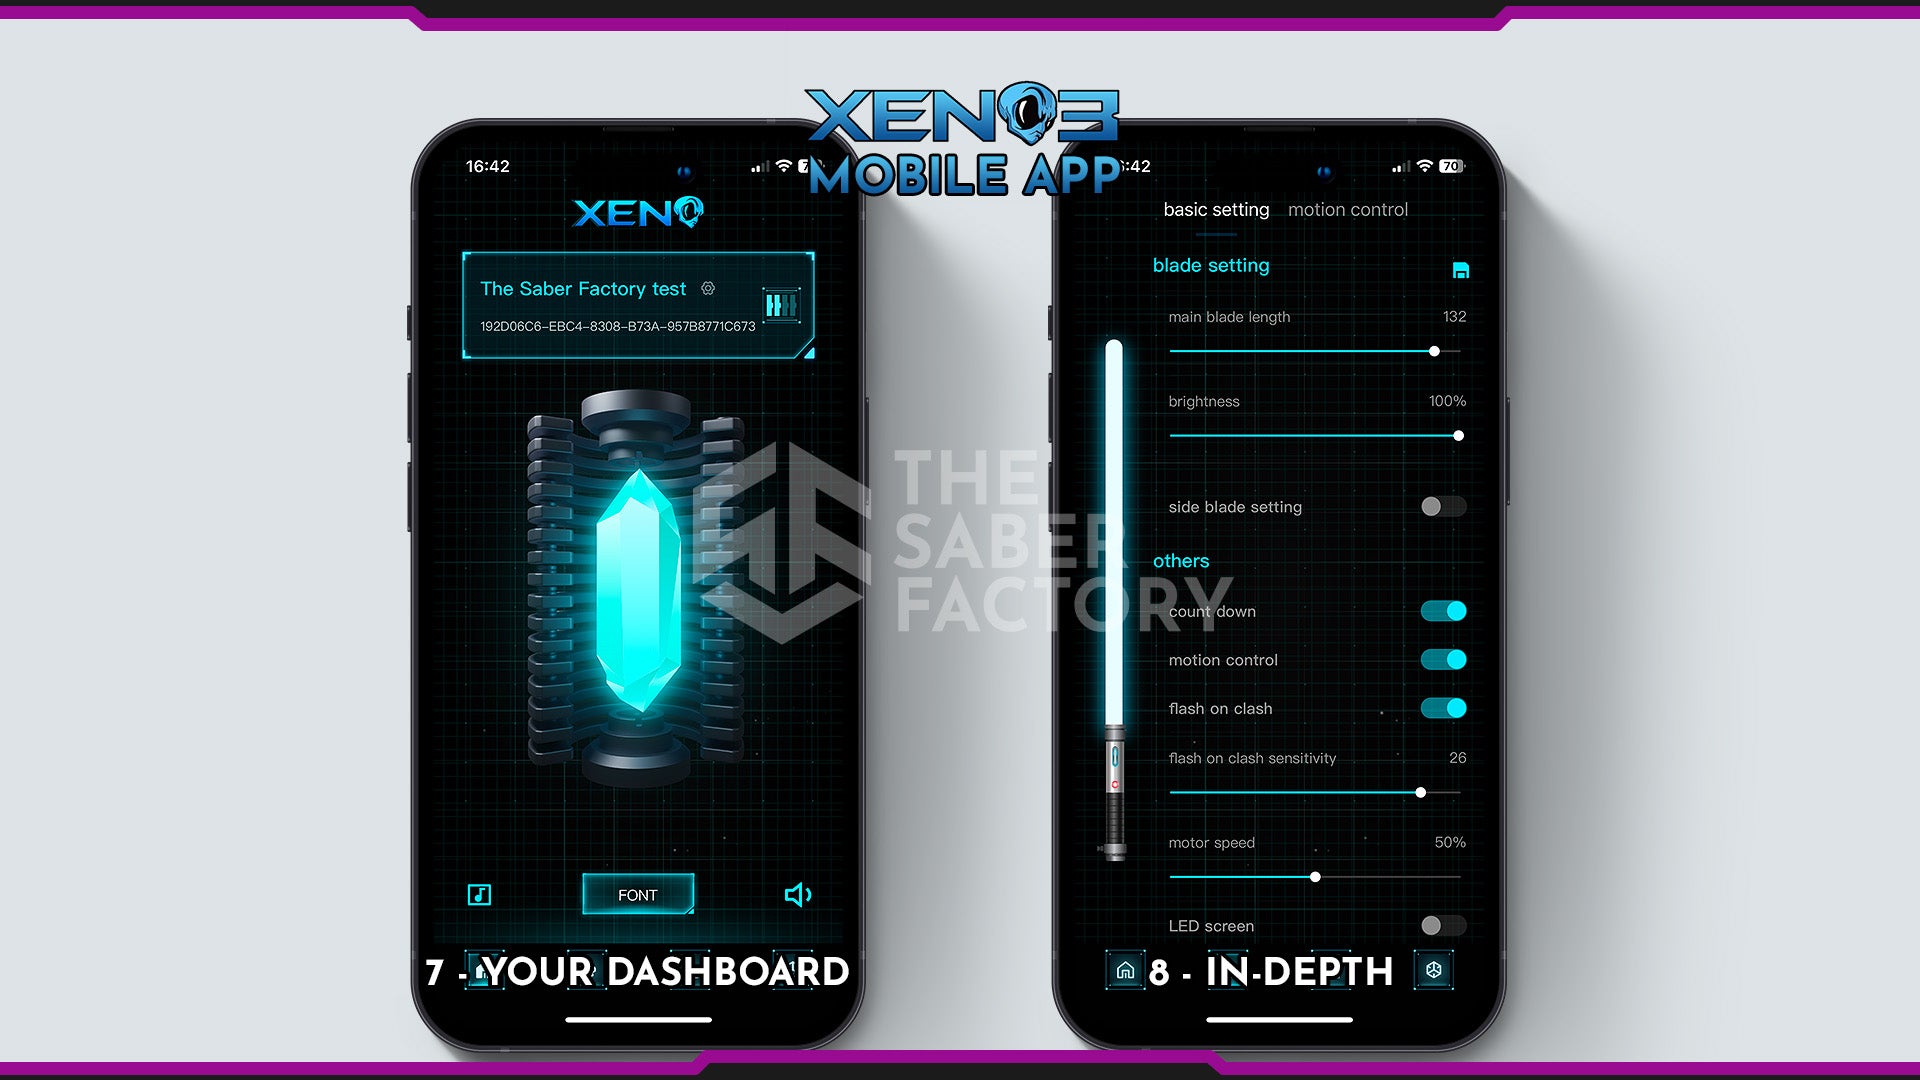 Xeno3 app configurator for baselit and neopixel sabers